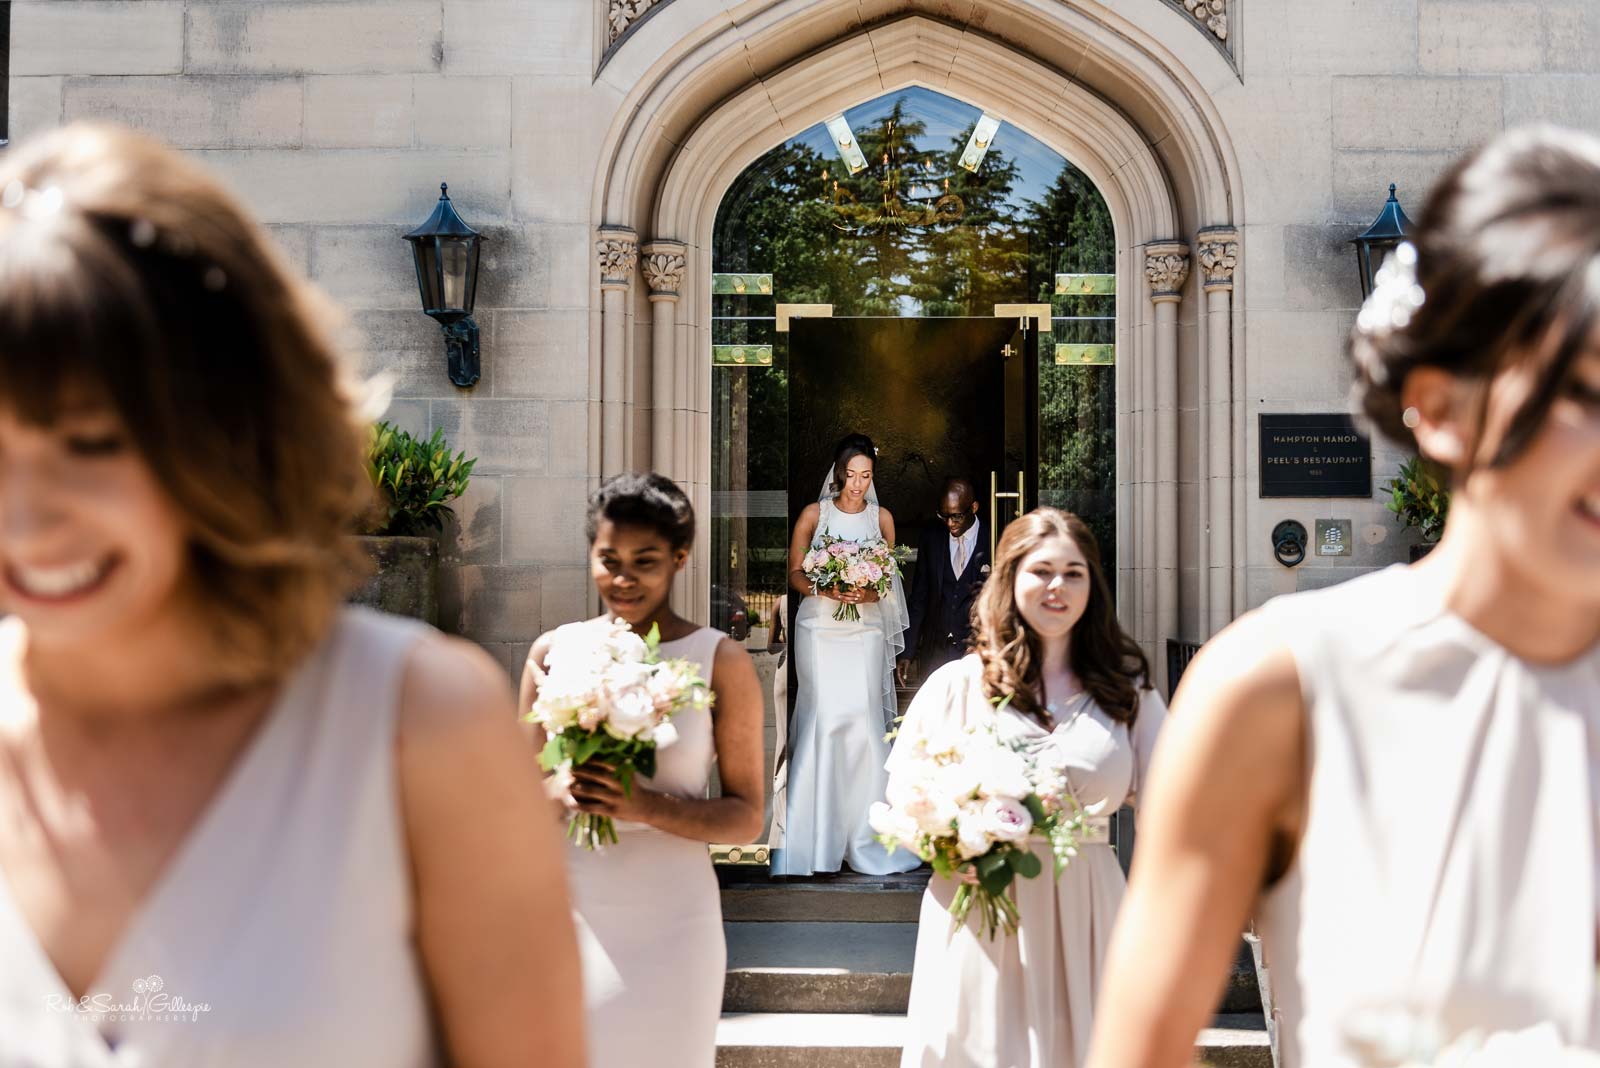 Bride and bridesmaids leaving Hampton Manor for ceremony at church